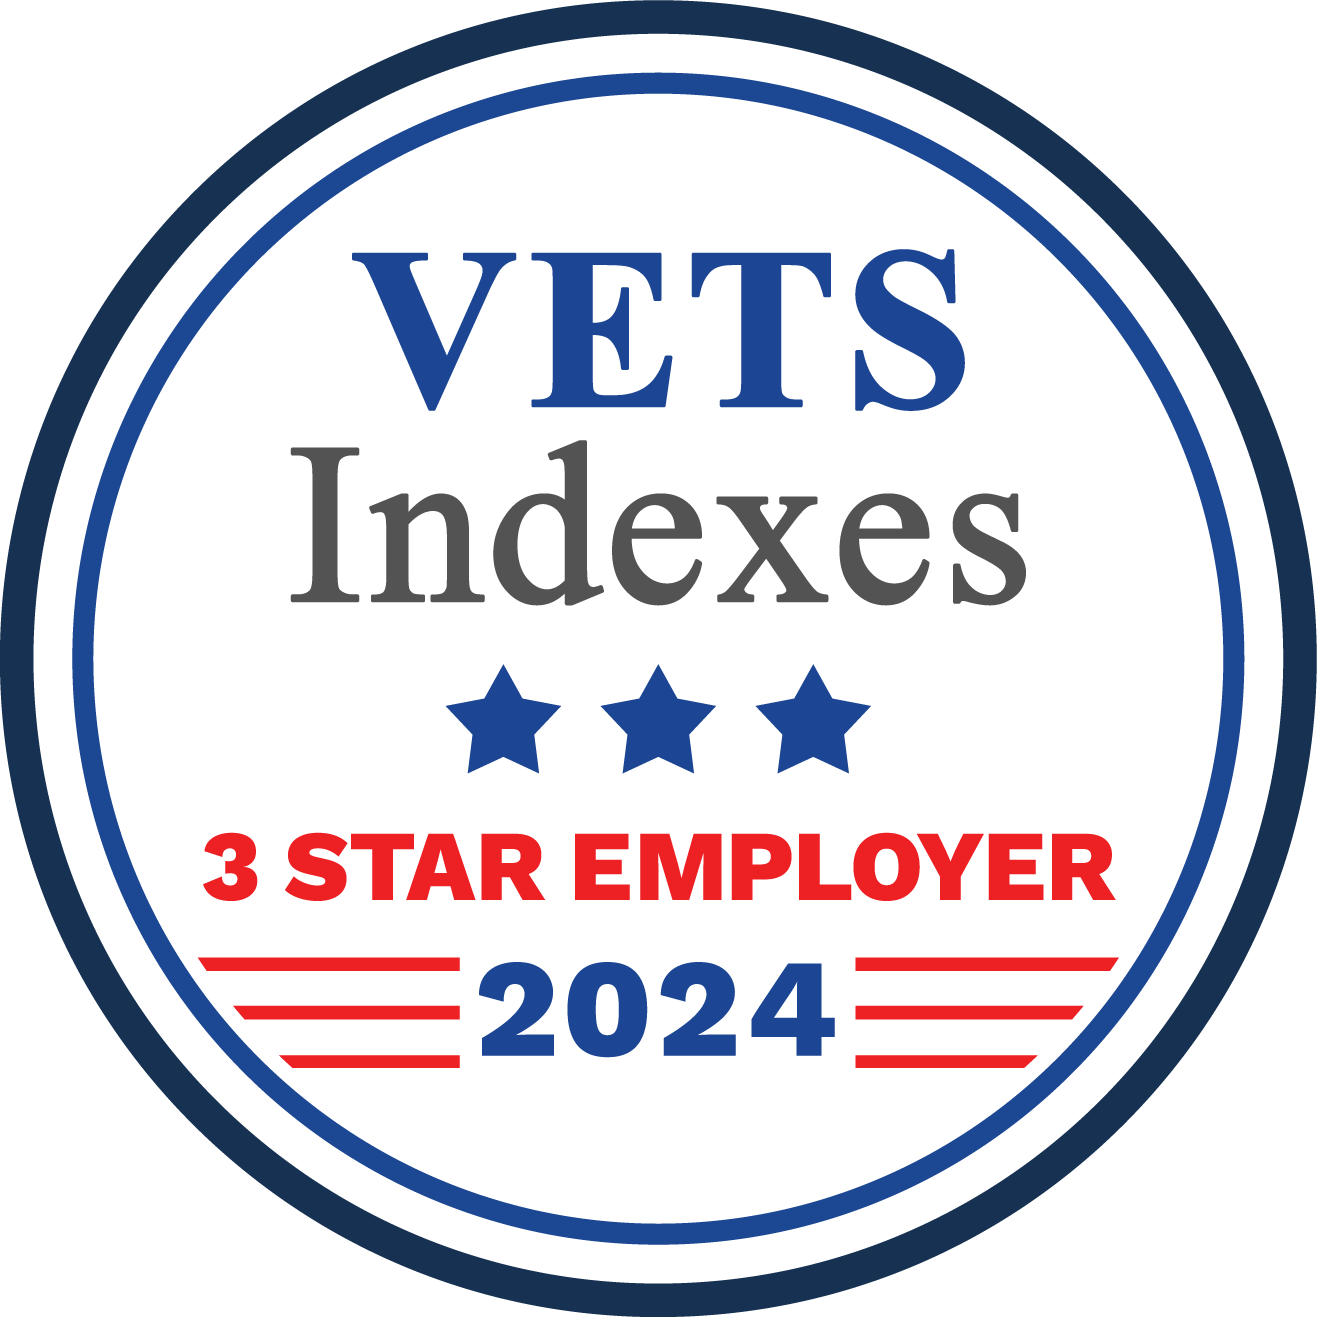 VETS Indexes 3 Star Employer